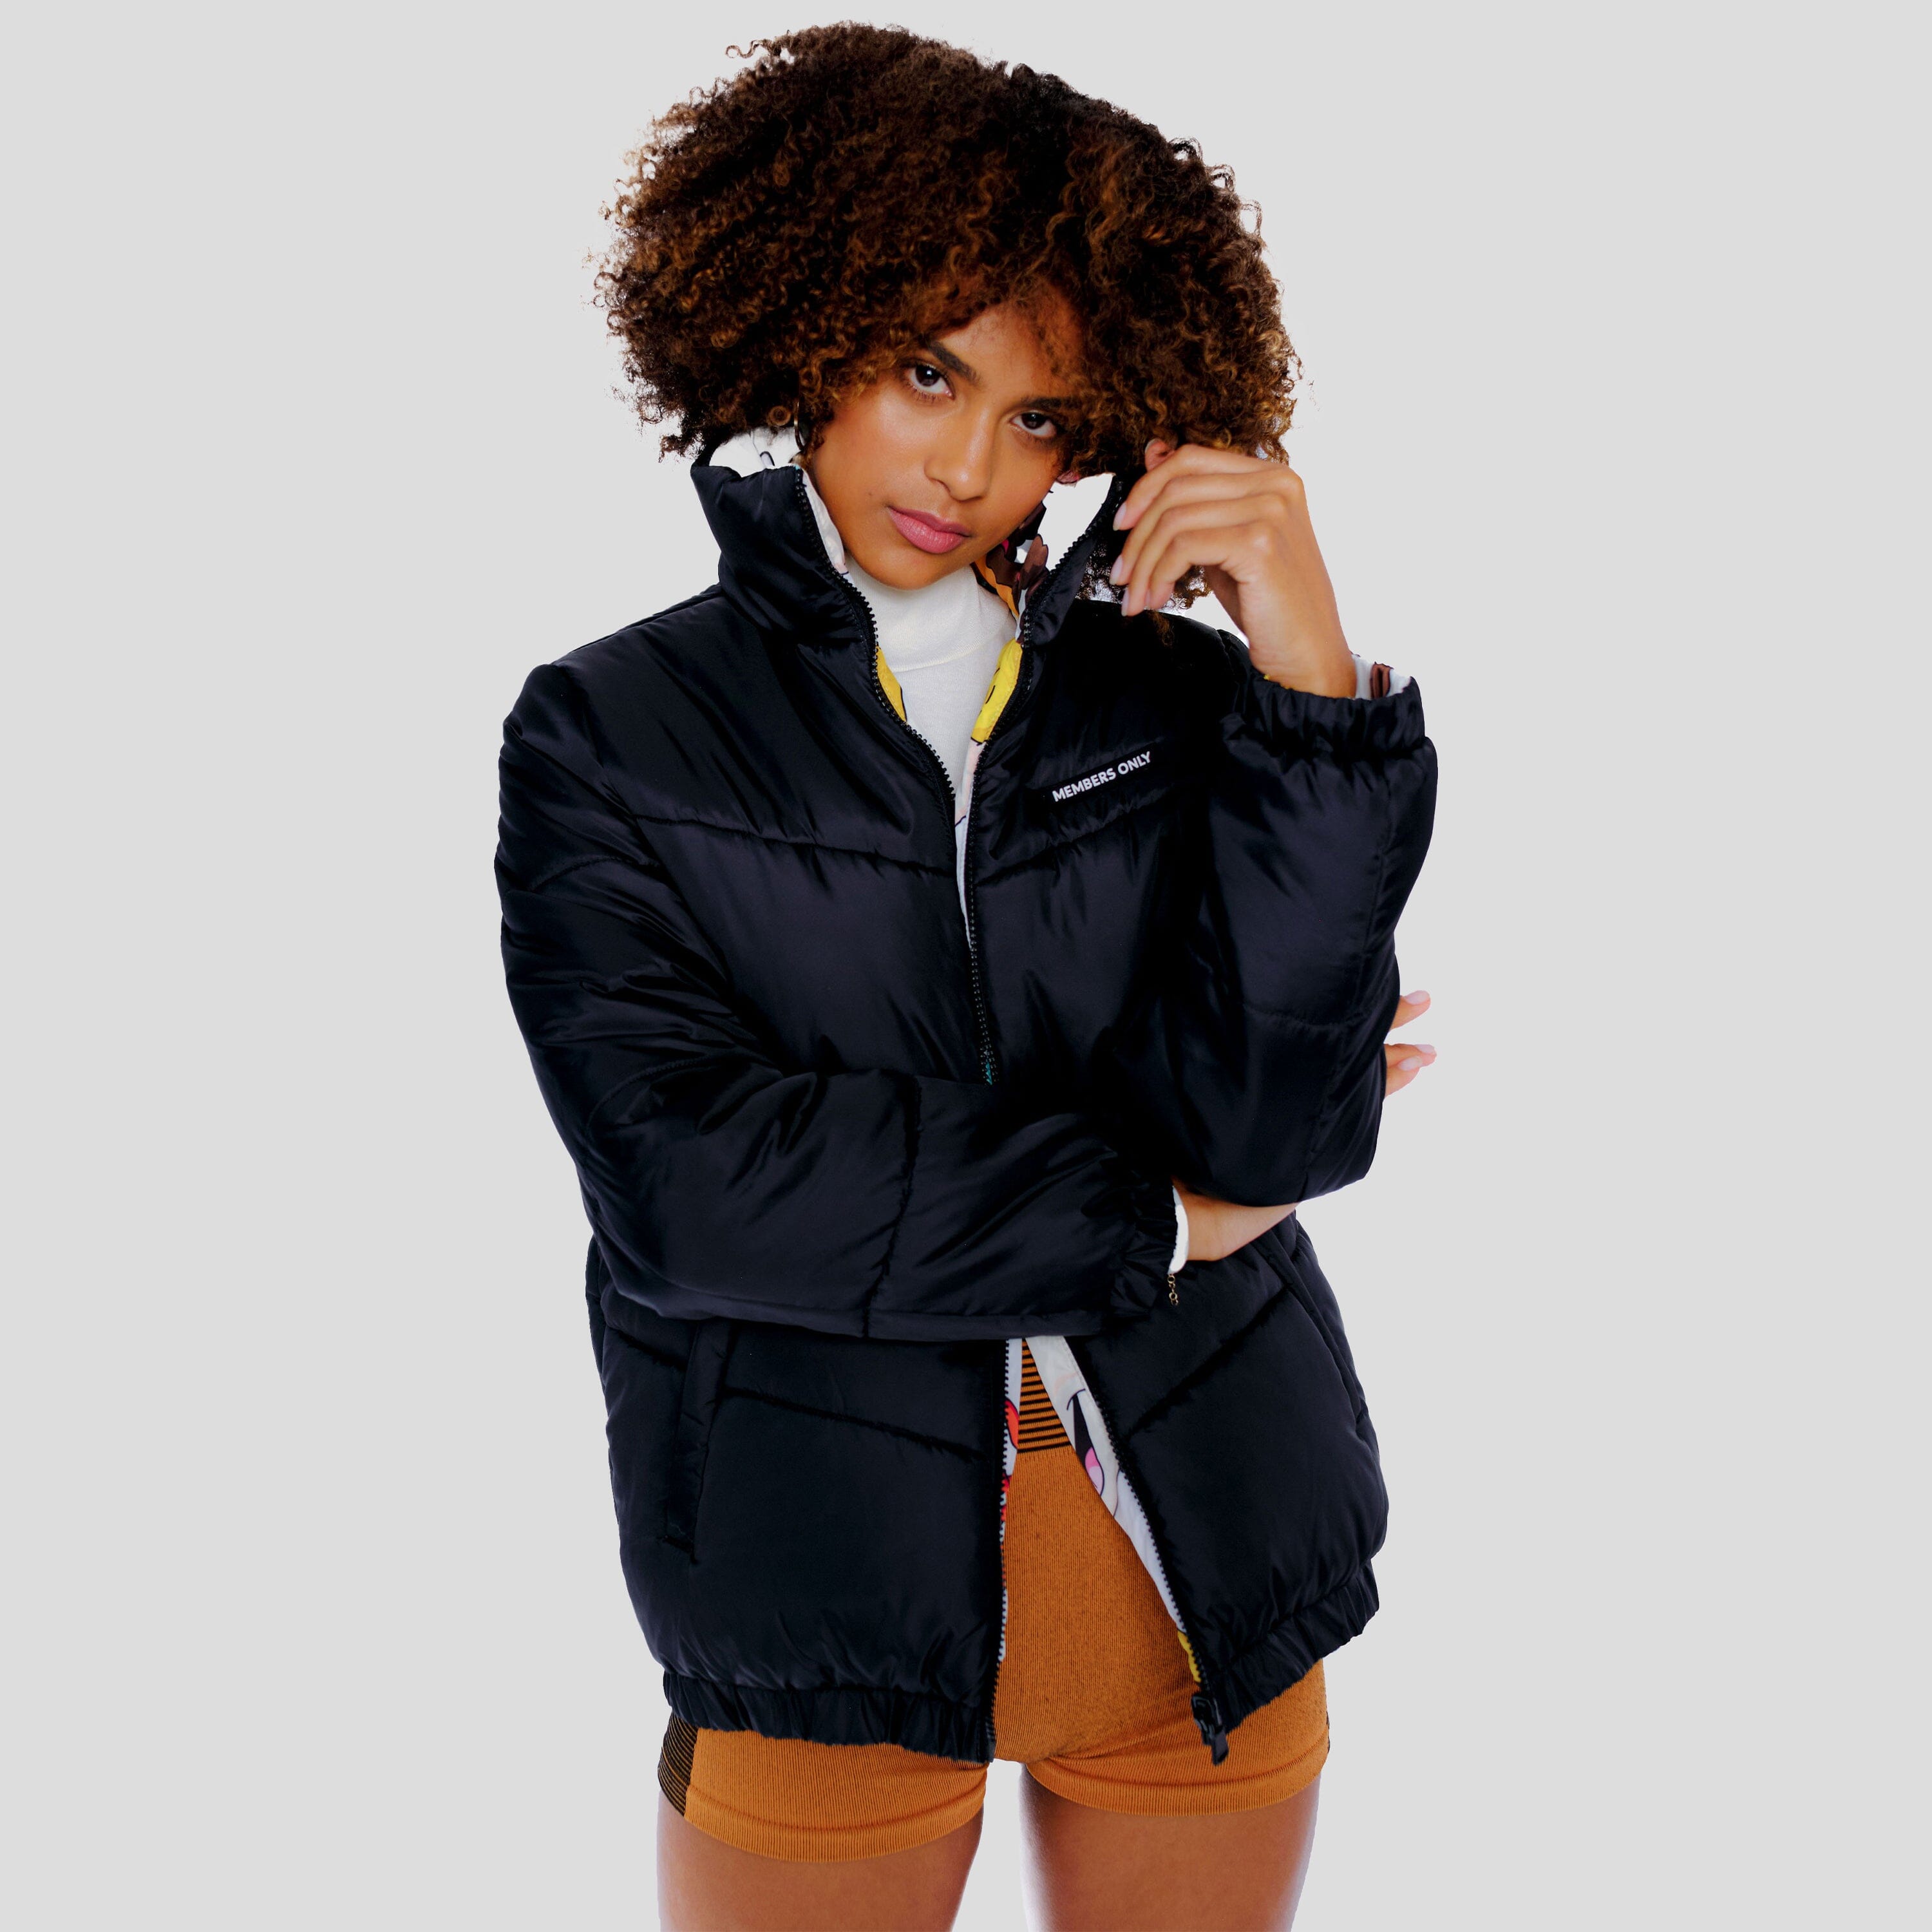 Women's Fall Winter Collection : Women's Winter Coats – Members Only®